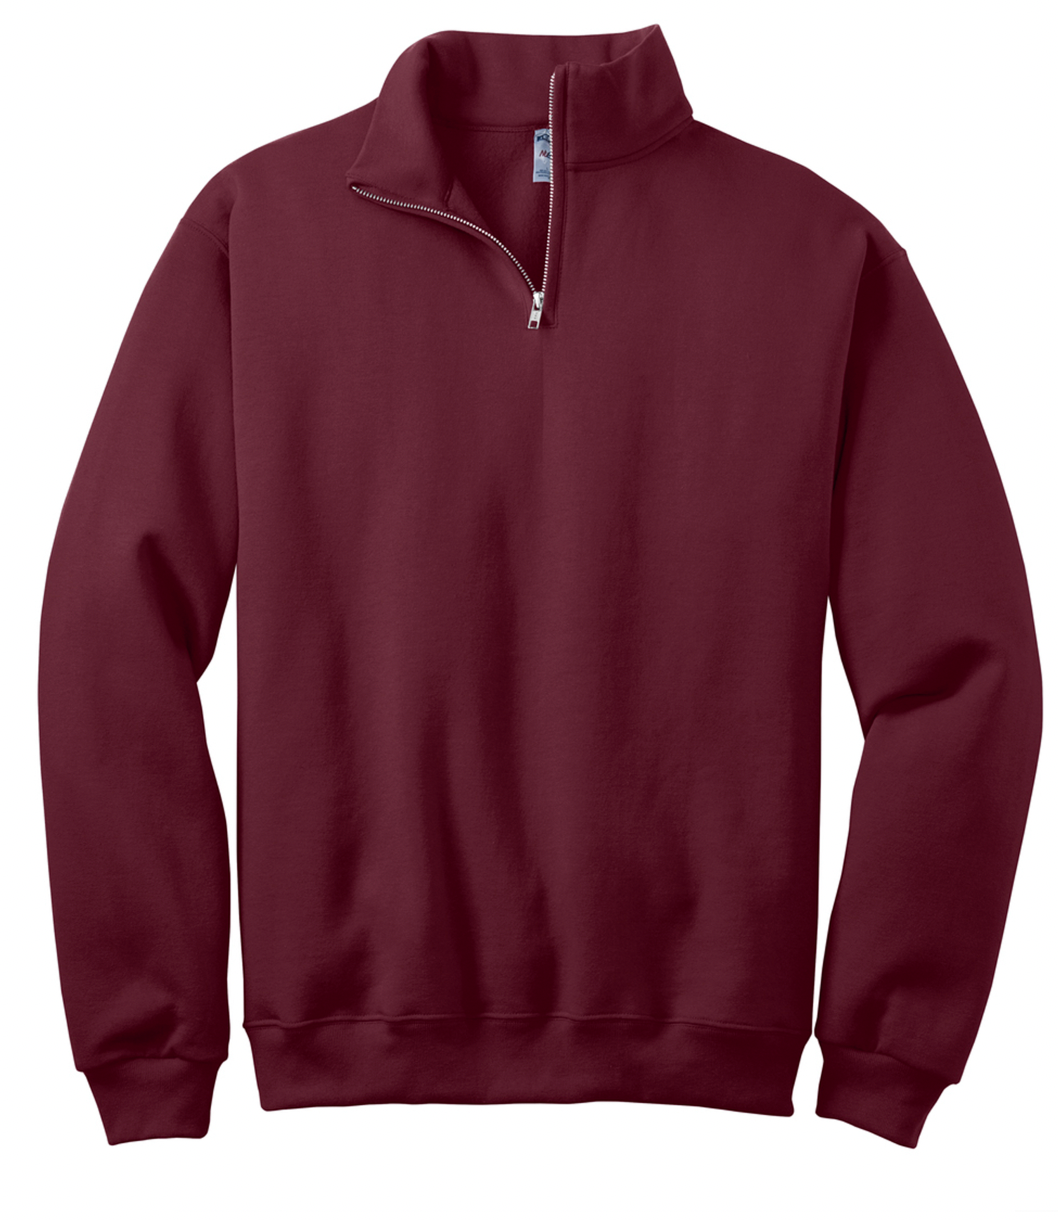 Mary Hill - Integrated Services 1/4 Zip Sweatshirt